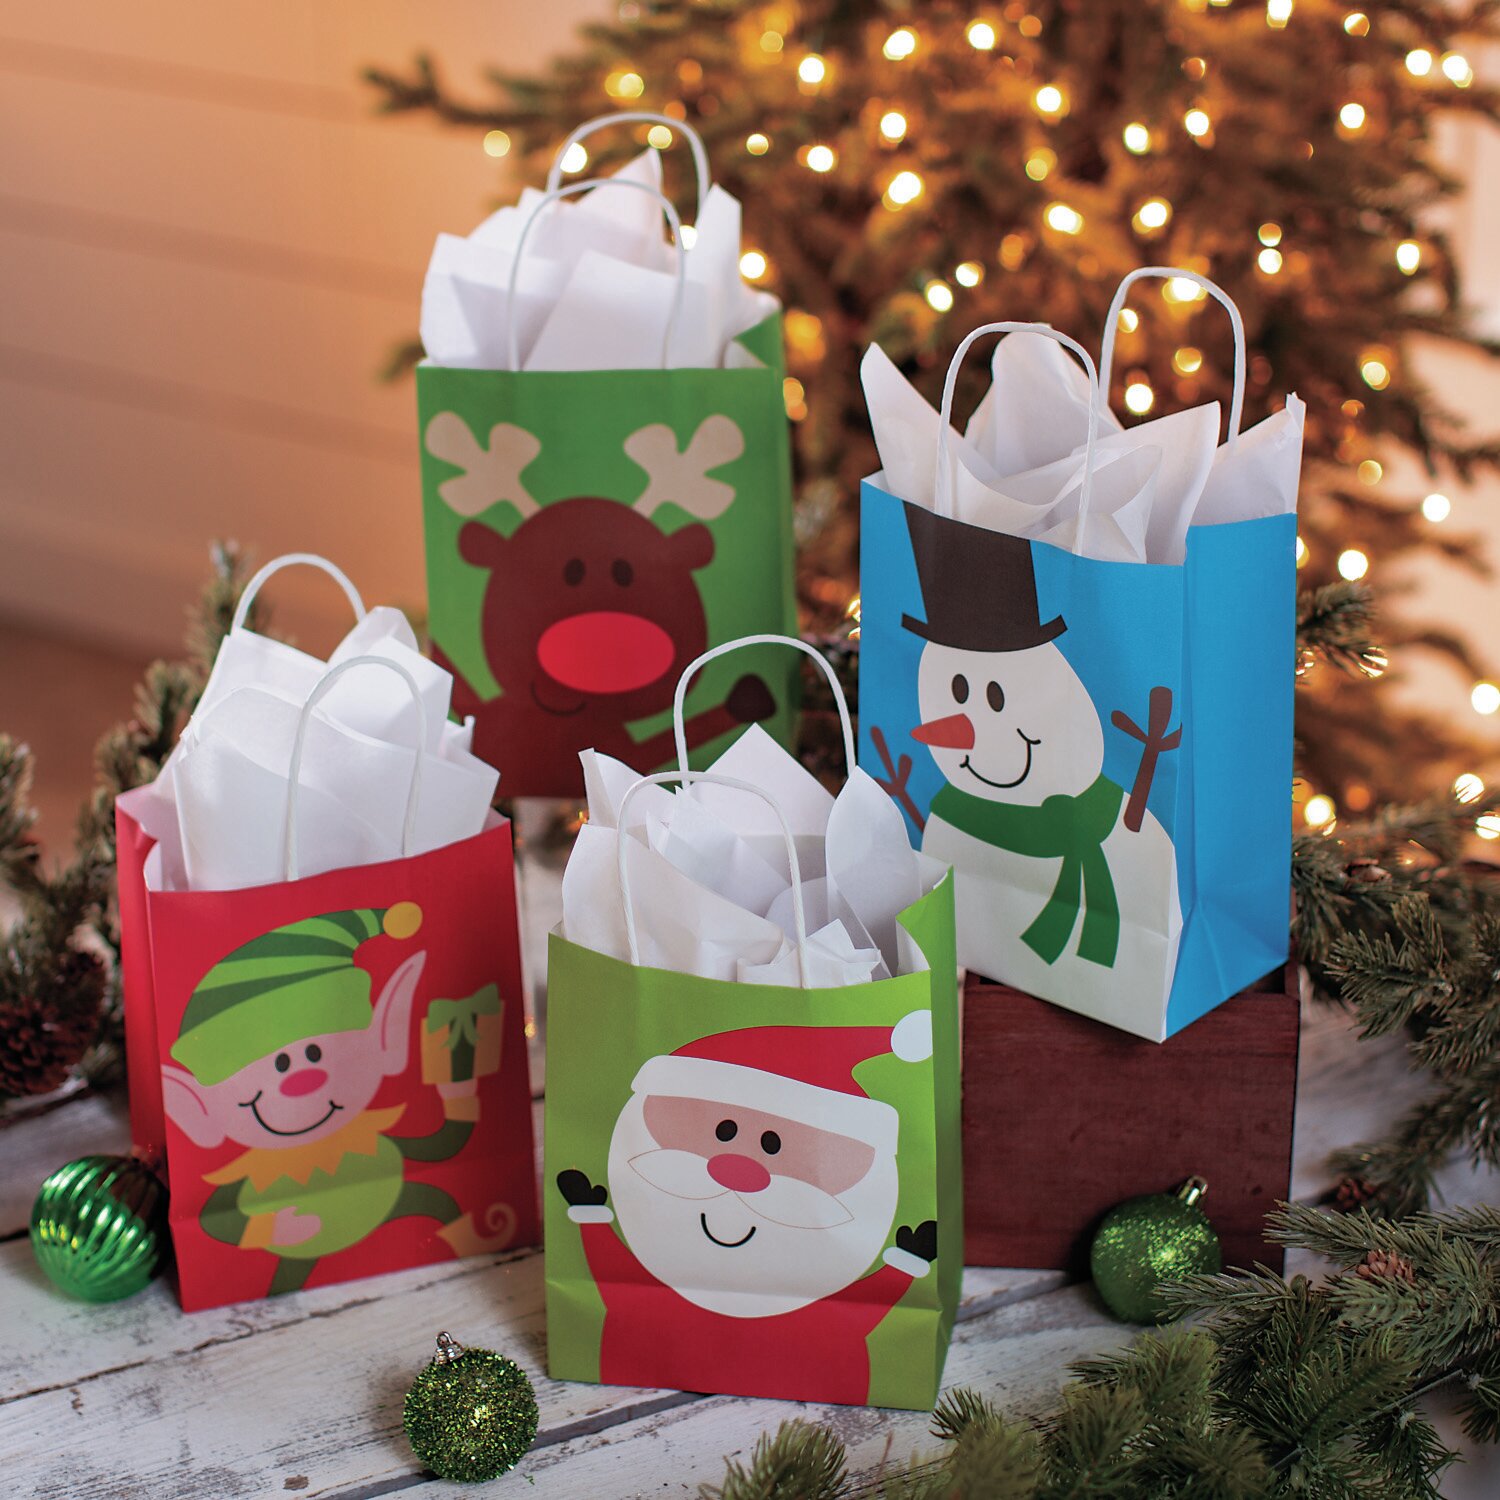 Wrapables Non-Woven Christmas Holiday Drawstring Gift Bags for Party F